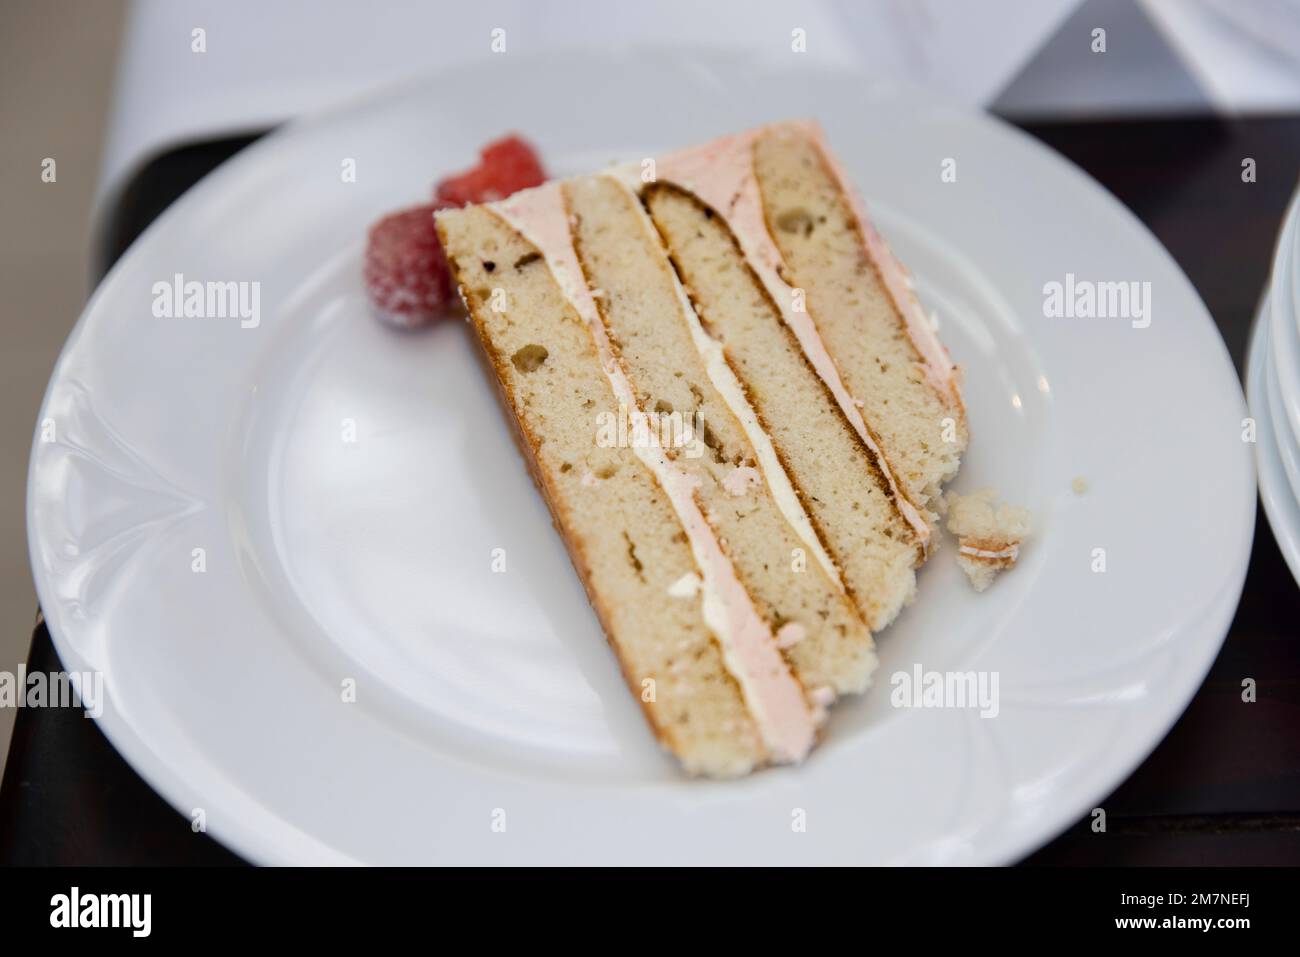 Butter cream cake served on a white plate Stock Photo